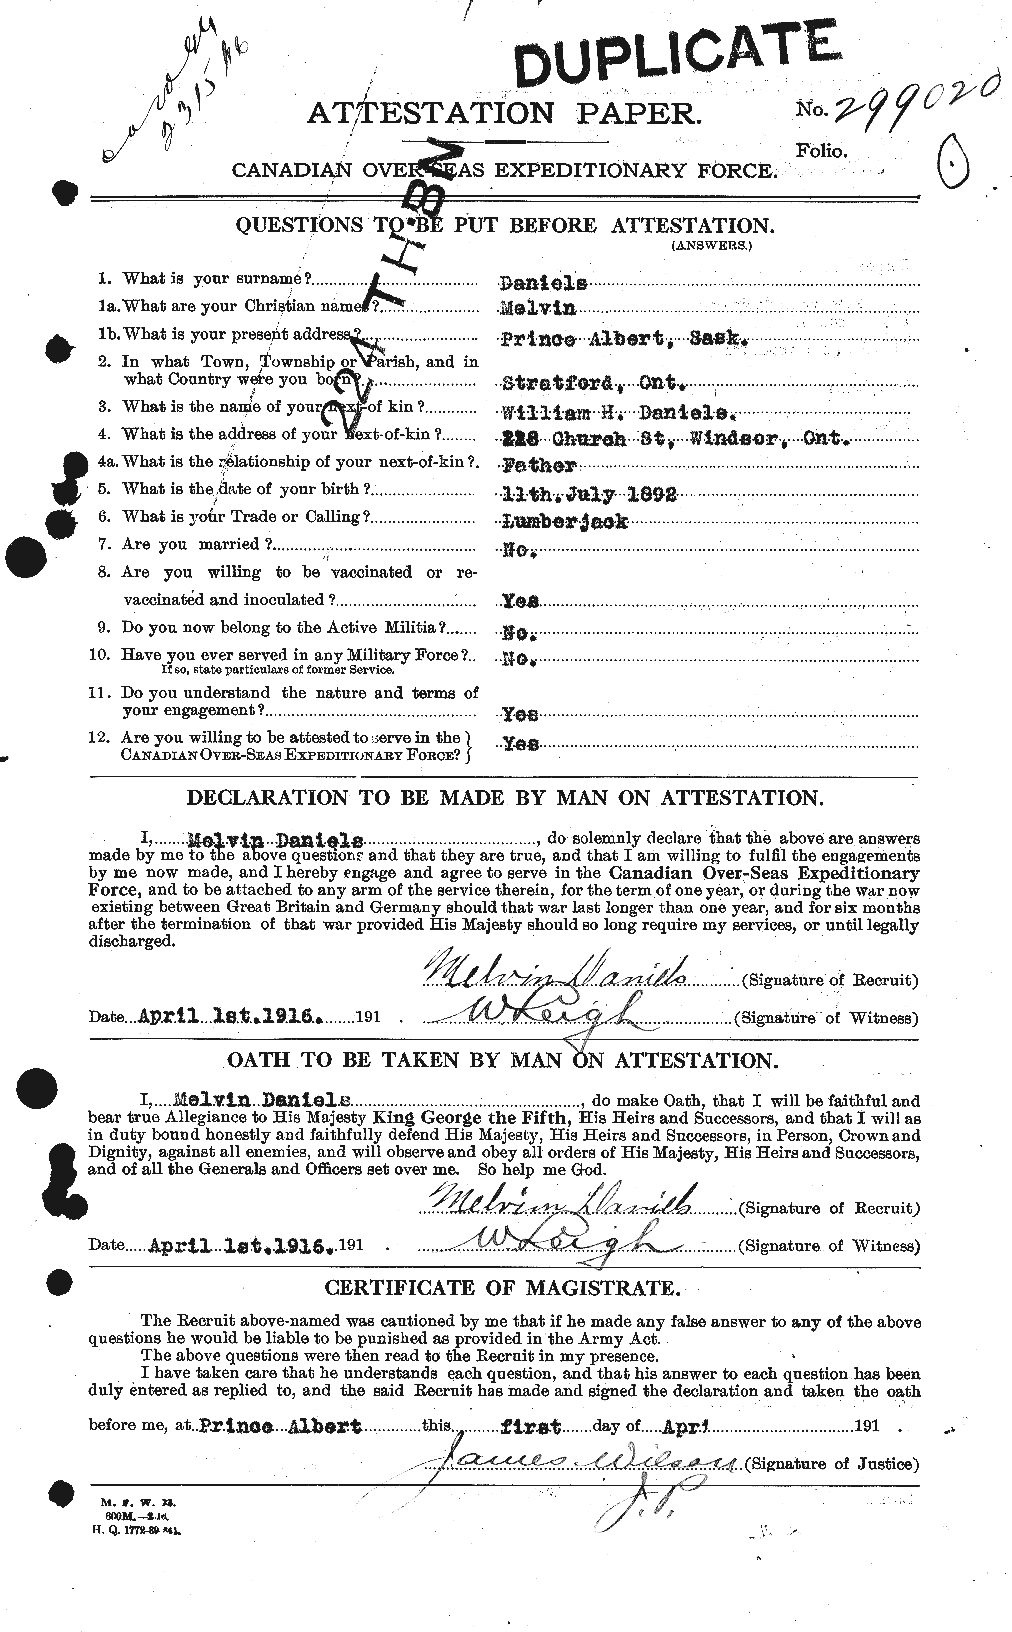 Personnel Records of the First World War - CEF 279655a